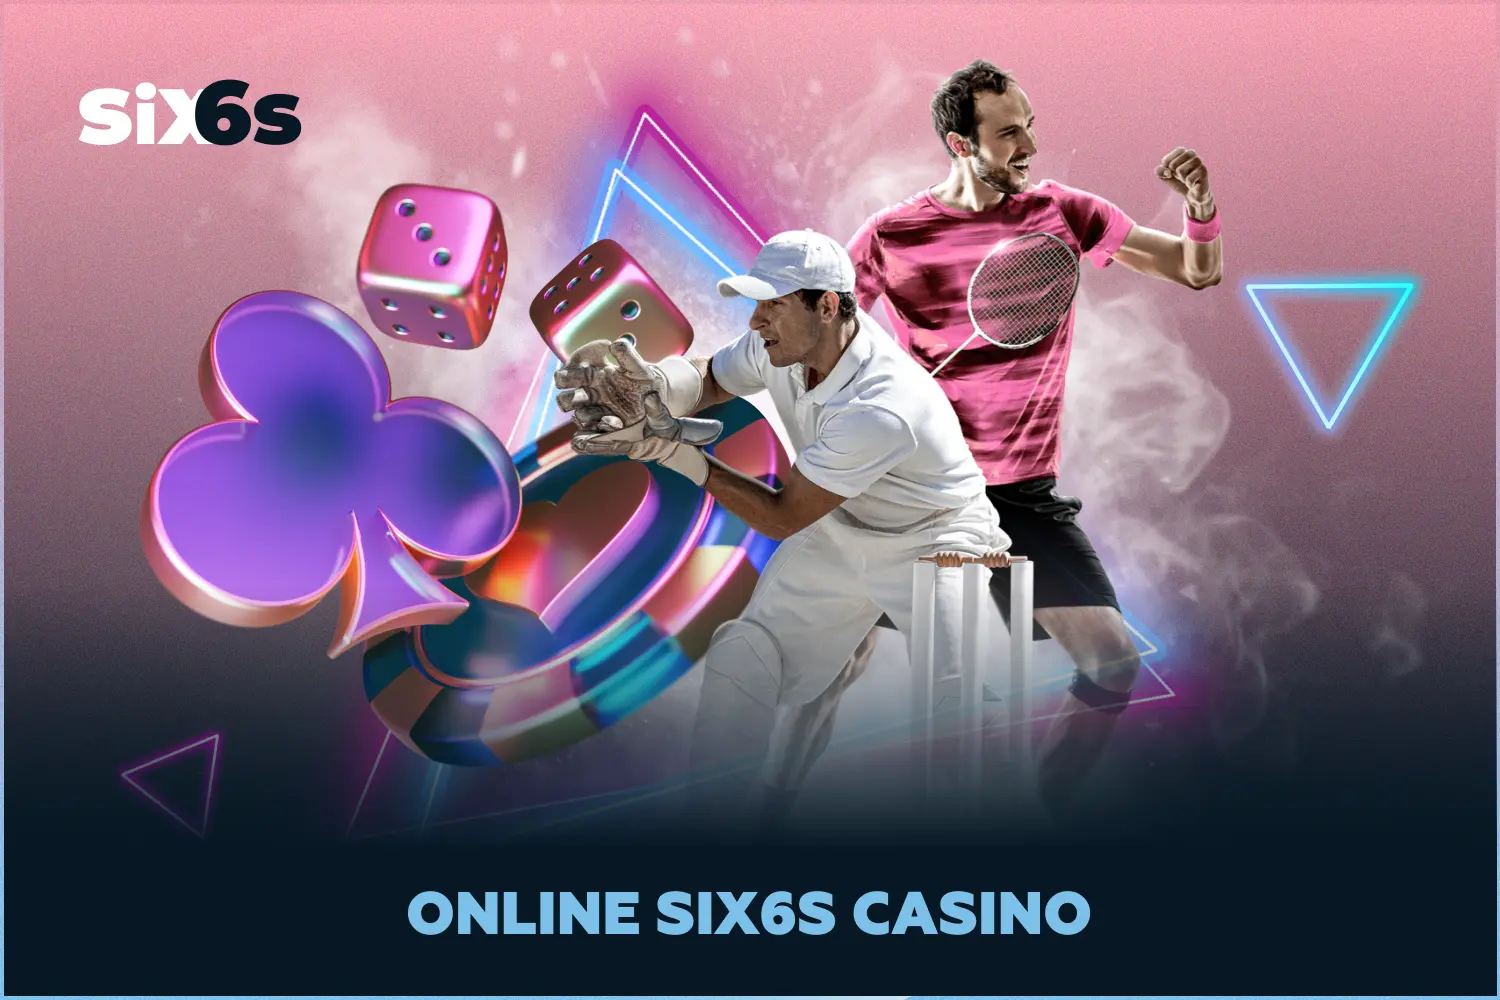 Six6s is constantly developing its online casino, partnering with the biggest providers and giving its users access to thousands of games for every taste